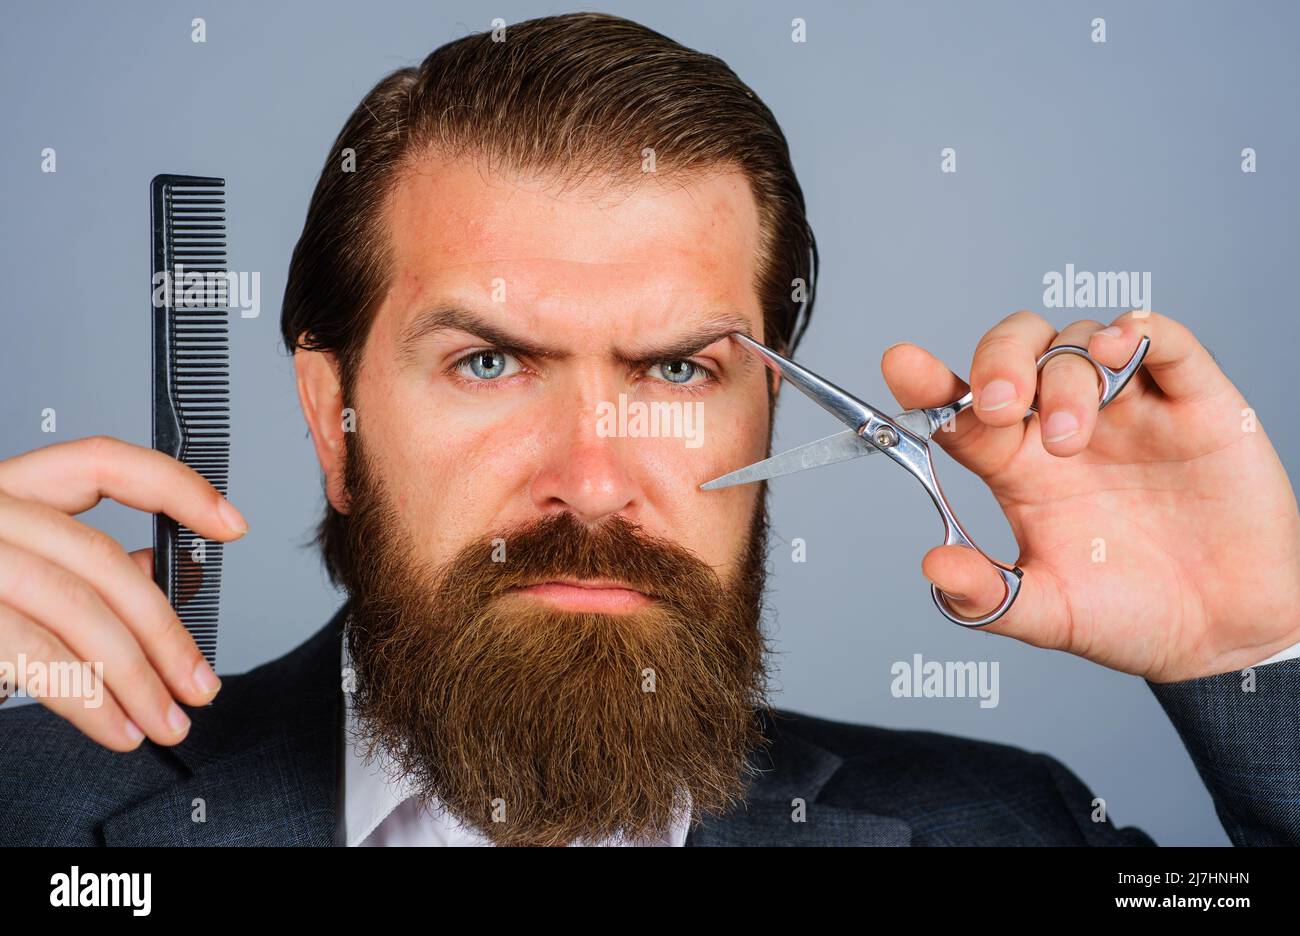 Barbershop advertising. Bearded man with scissors and comb. Male hairdresser with barber tools. Stock Photo